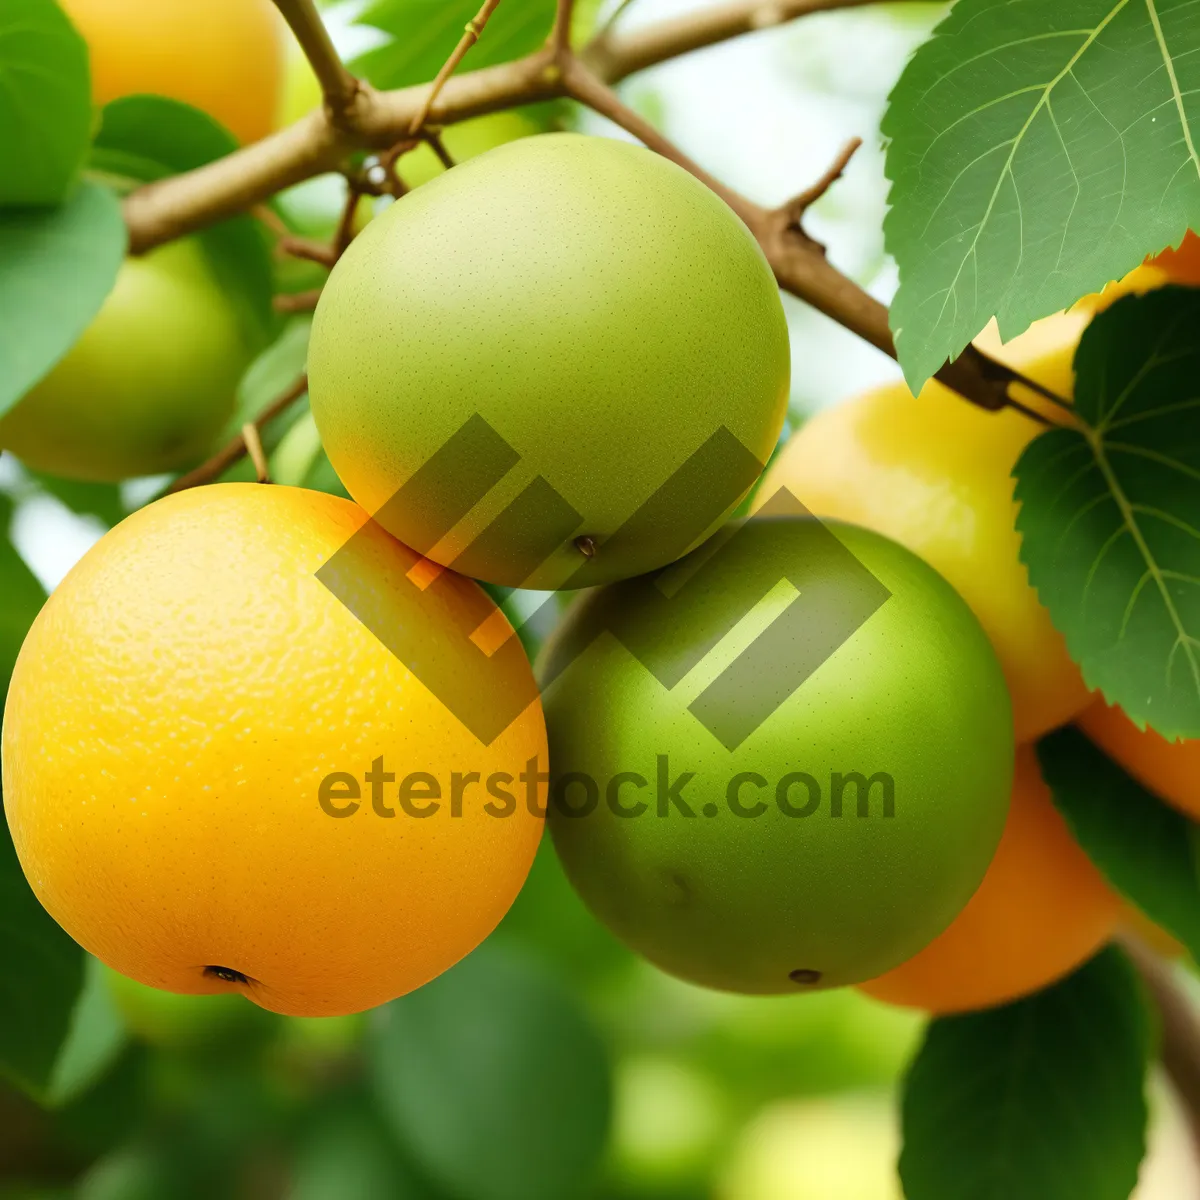 Picture of Vibrant Citrus Apple: Ripe, Fresh, and Healthy